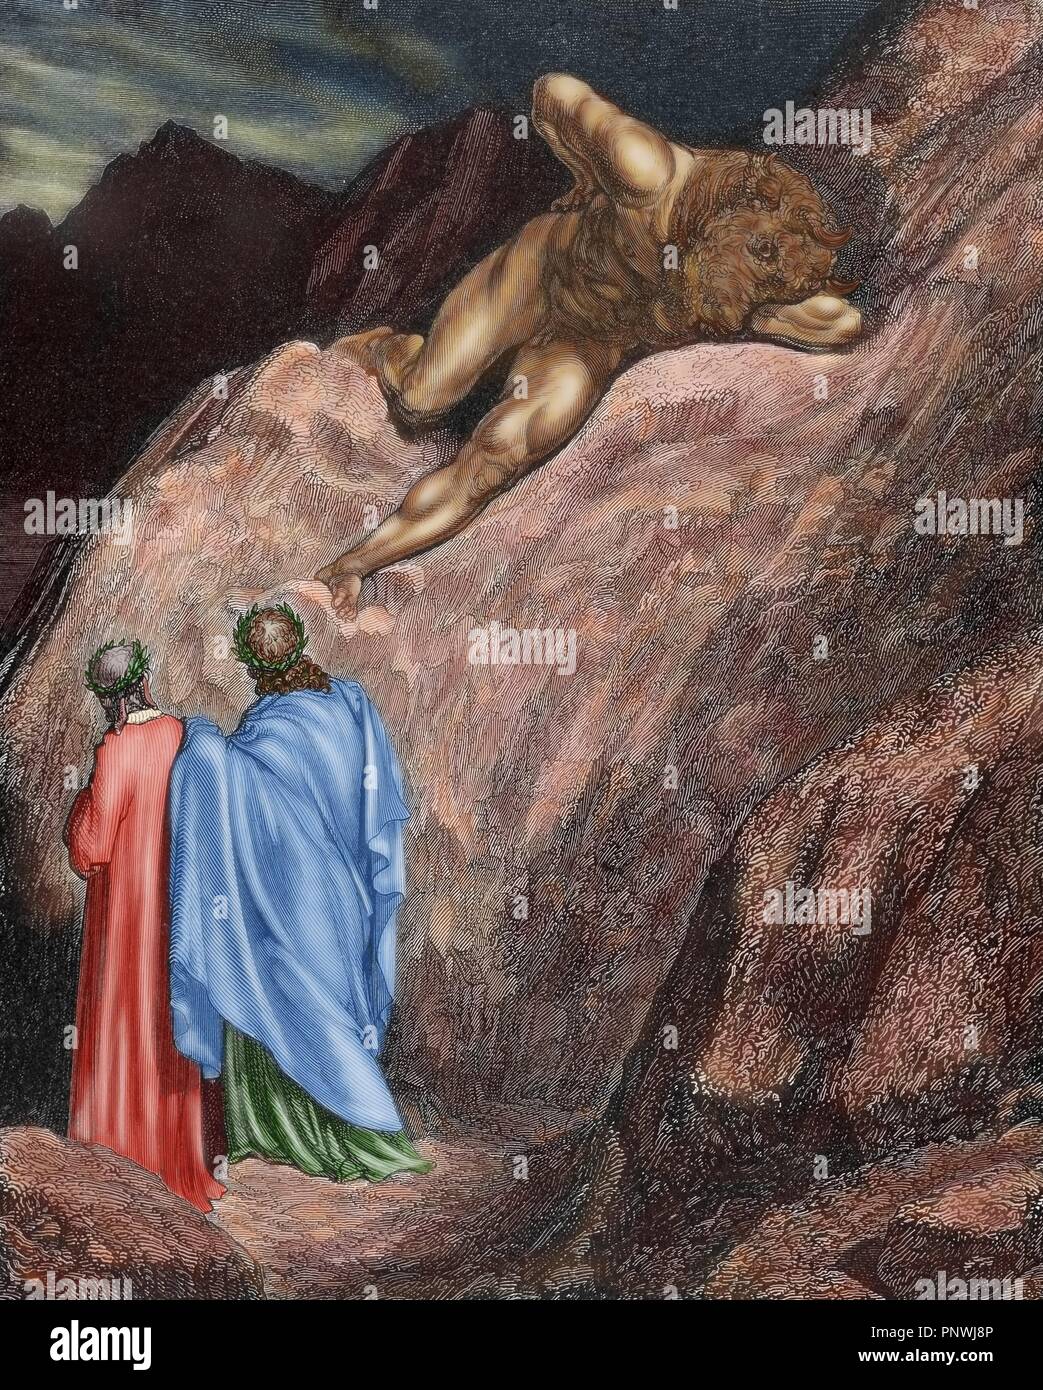 Inferno, Canto 8 : Virgil and Dante disembark at the citadel of Dis (Dite),  illustration from The Divine Comedy by Dante Alighieri, 1885 (digitally  coloured engraving)